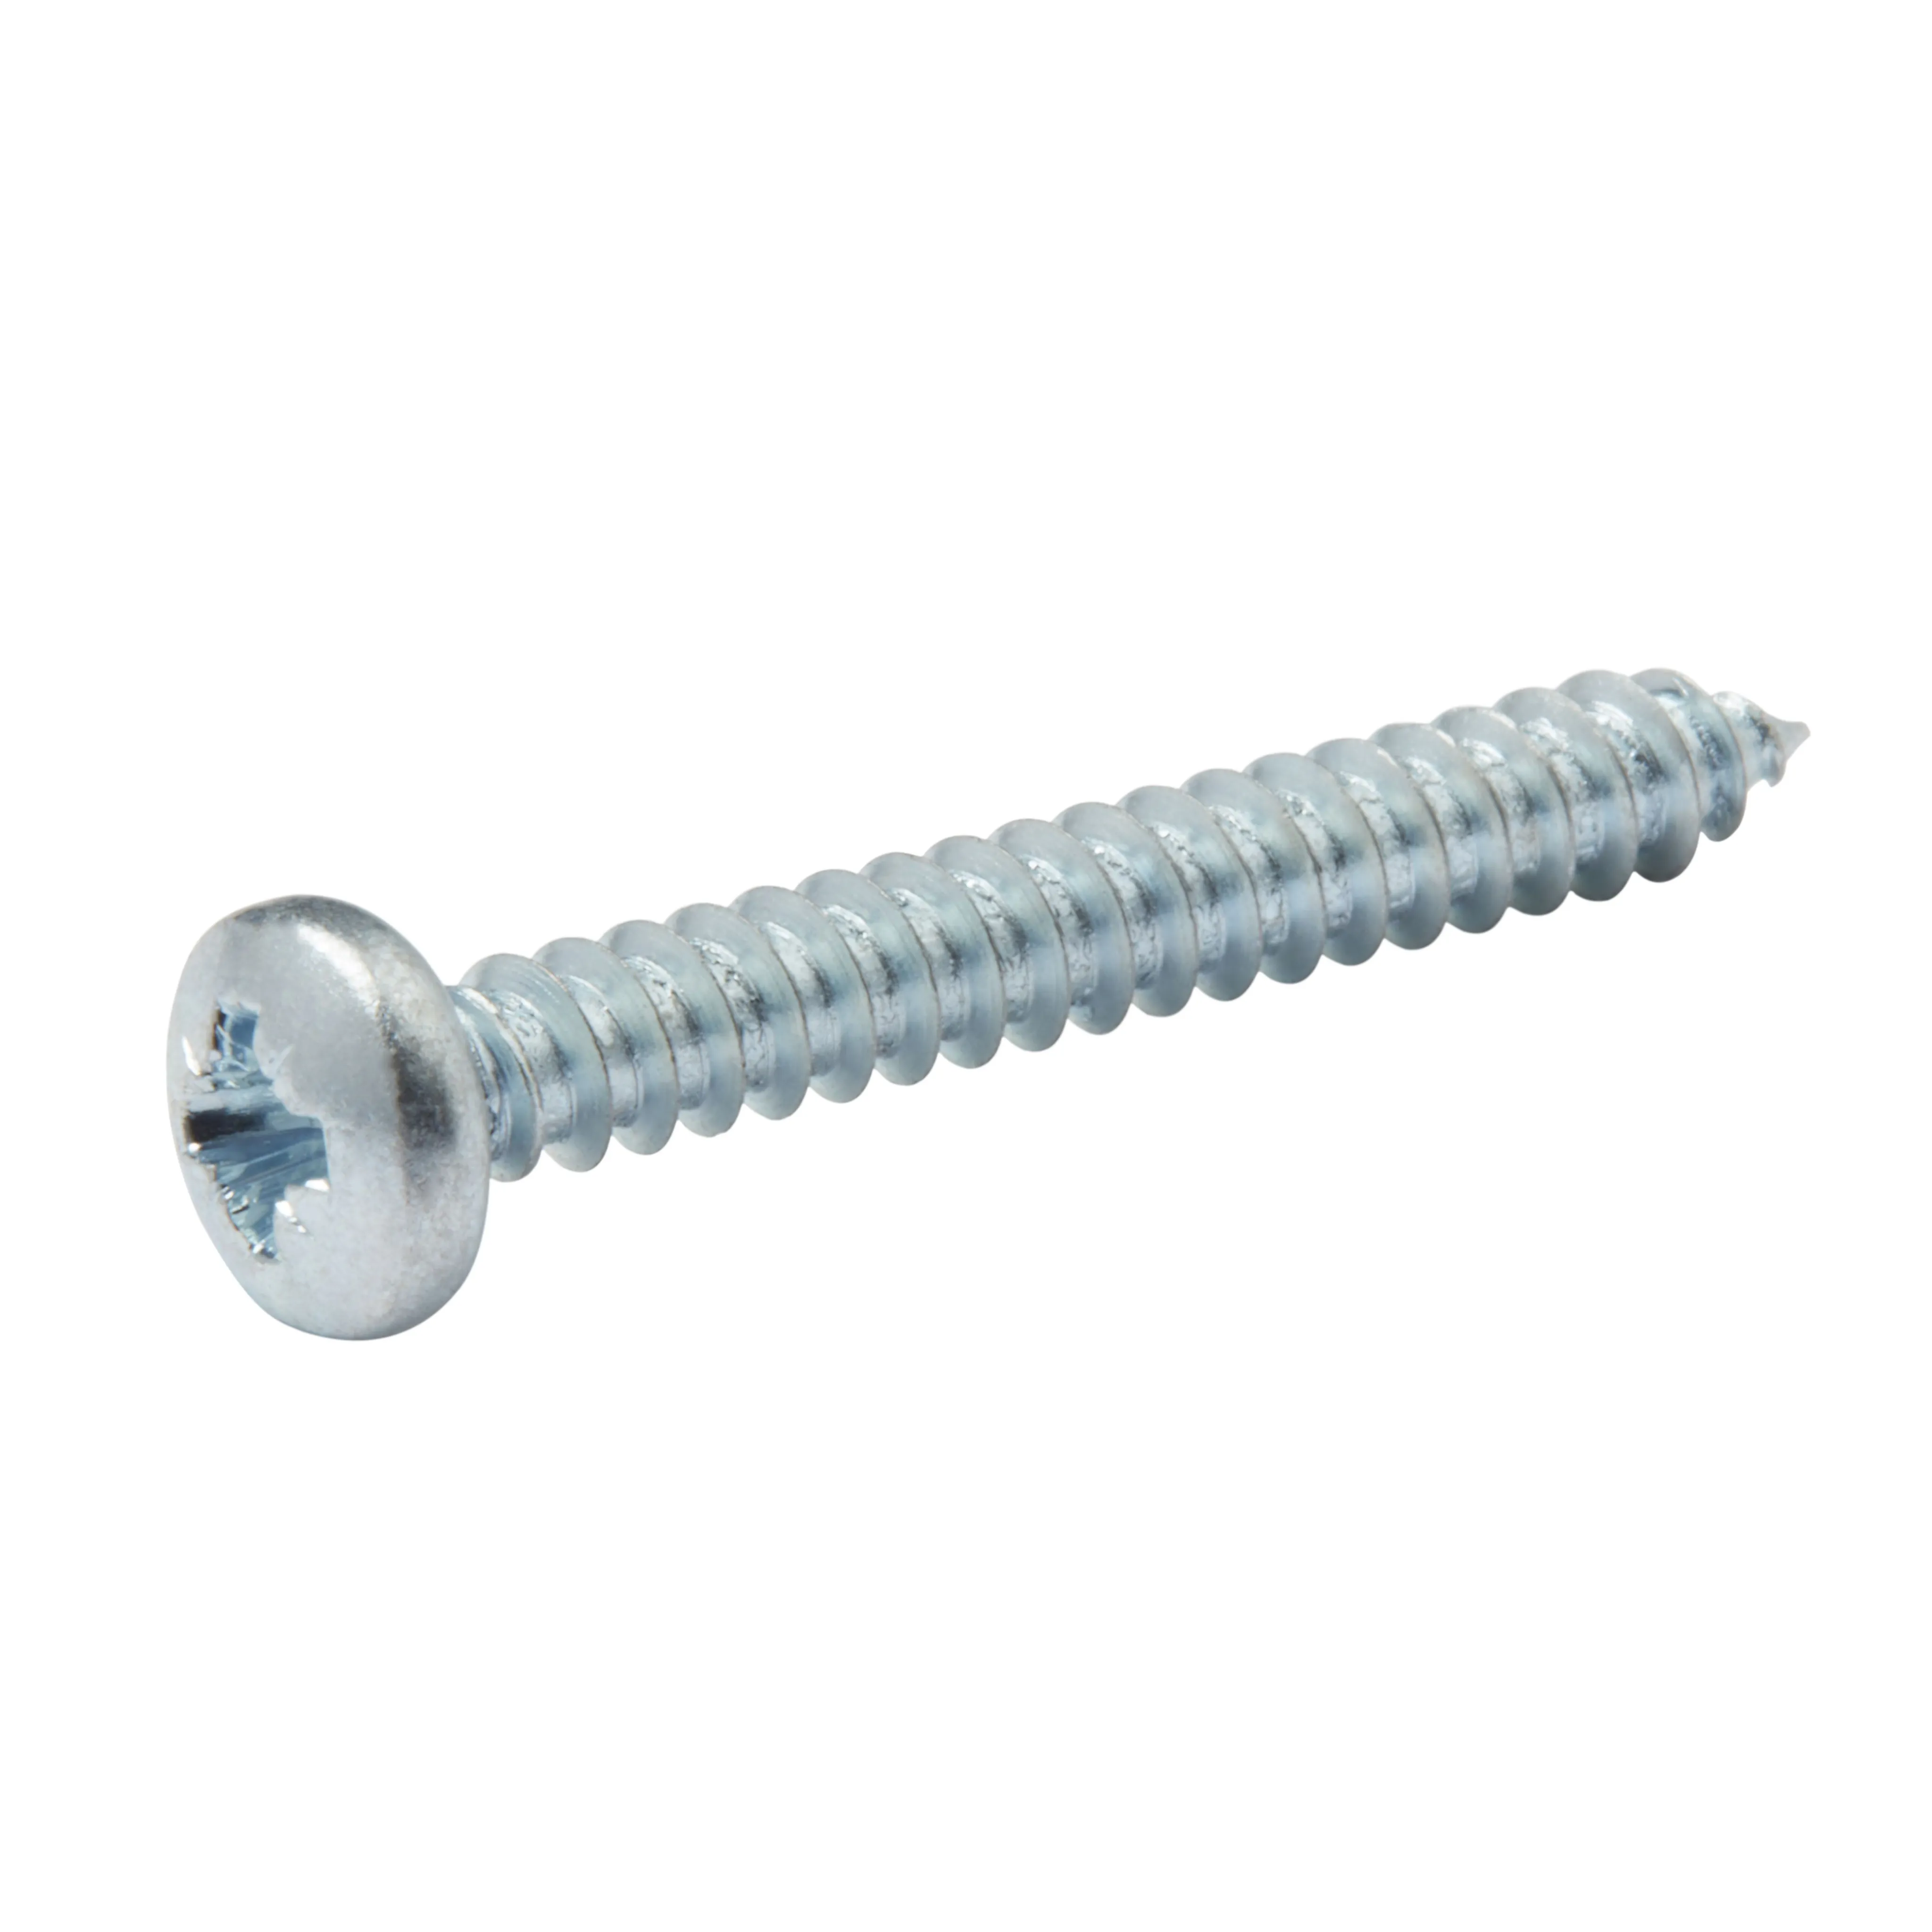 Diall PZ Pan head Zinc-plated Hardened steel Self-drilling screw (Dia)4.2mm (L)32mm, Pack of 25